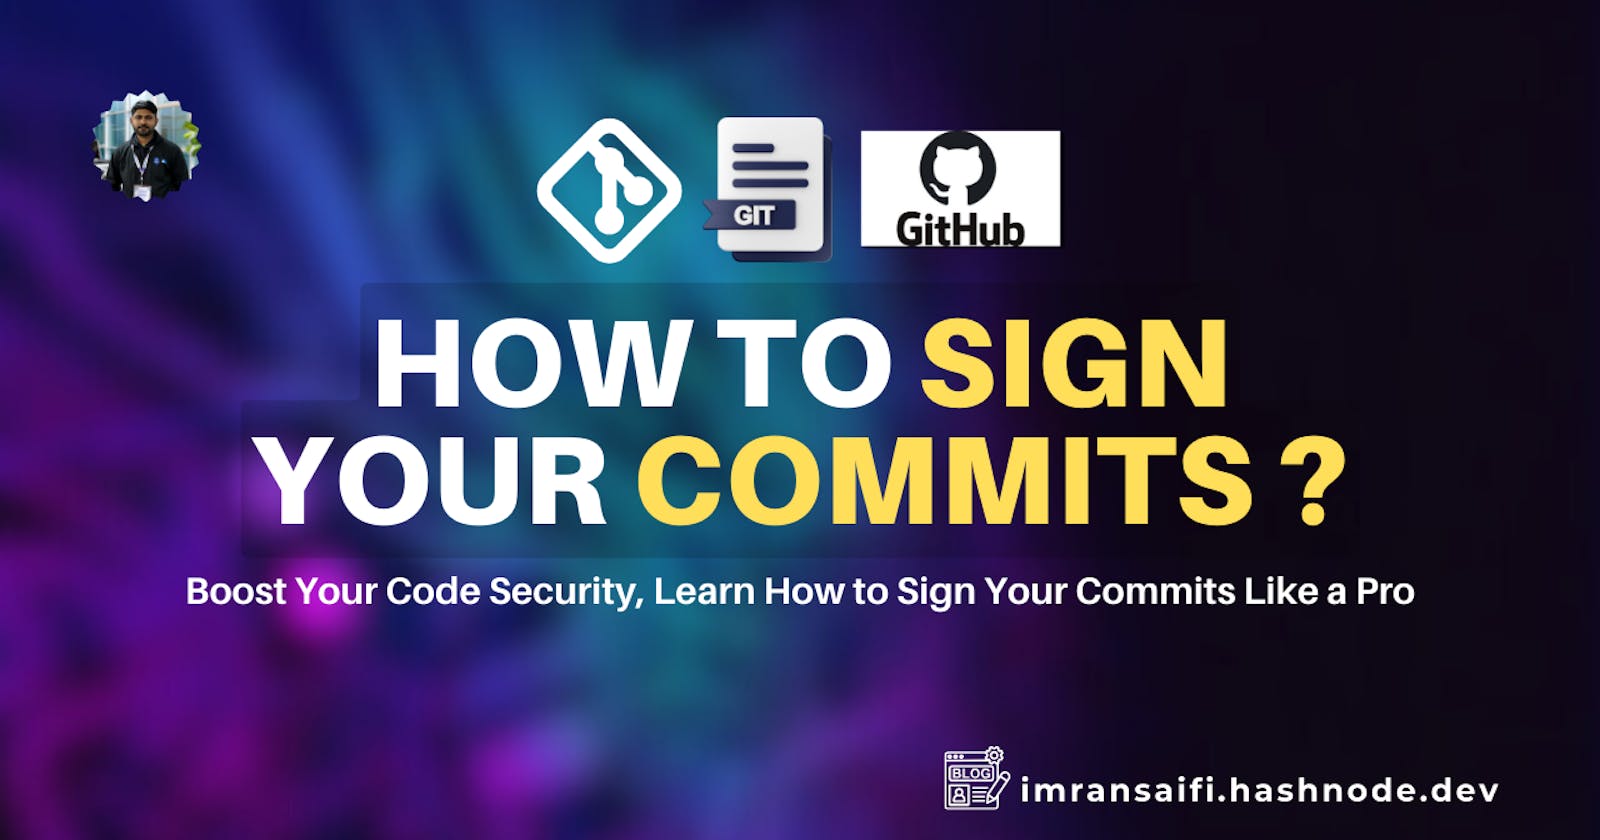 How to Sign Your Commits: A Guide for Git Users